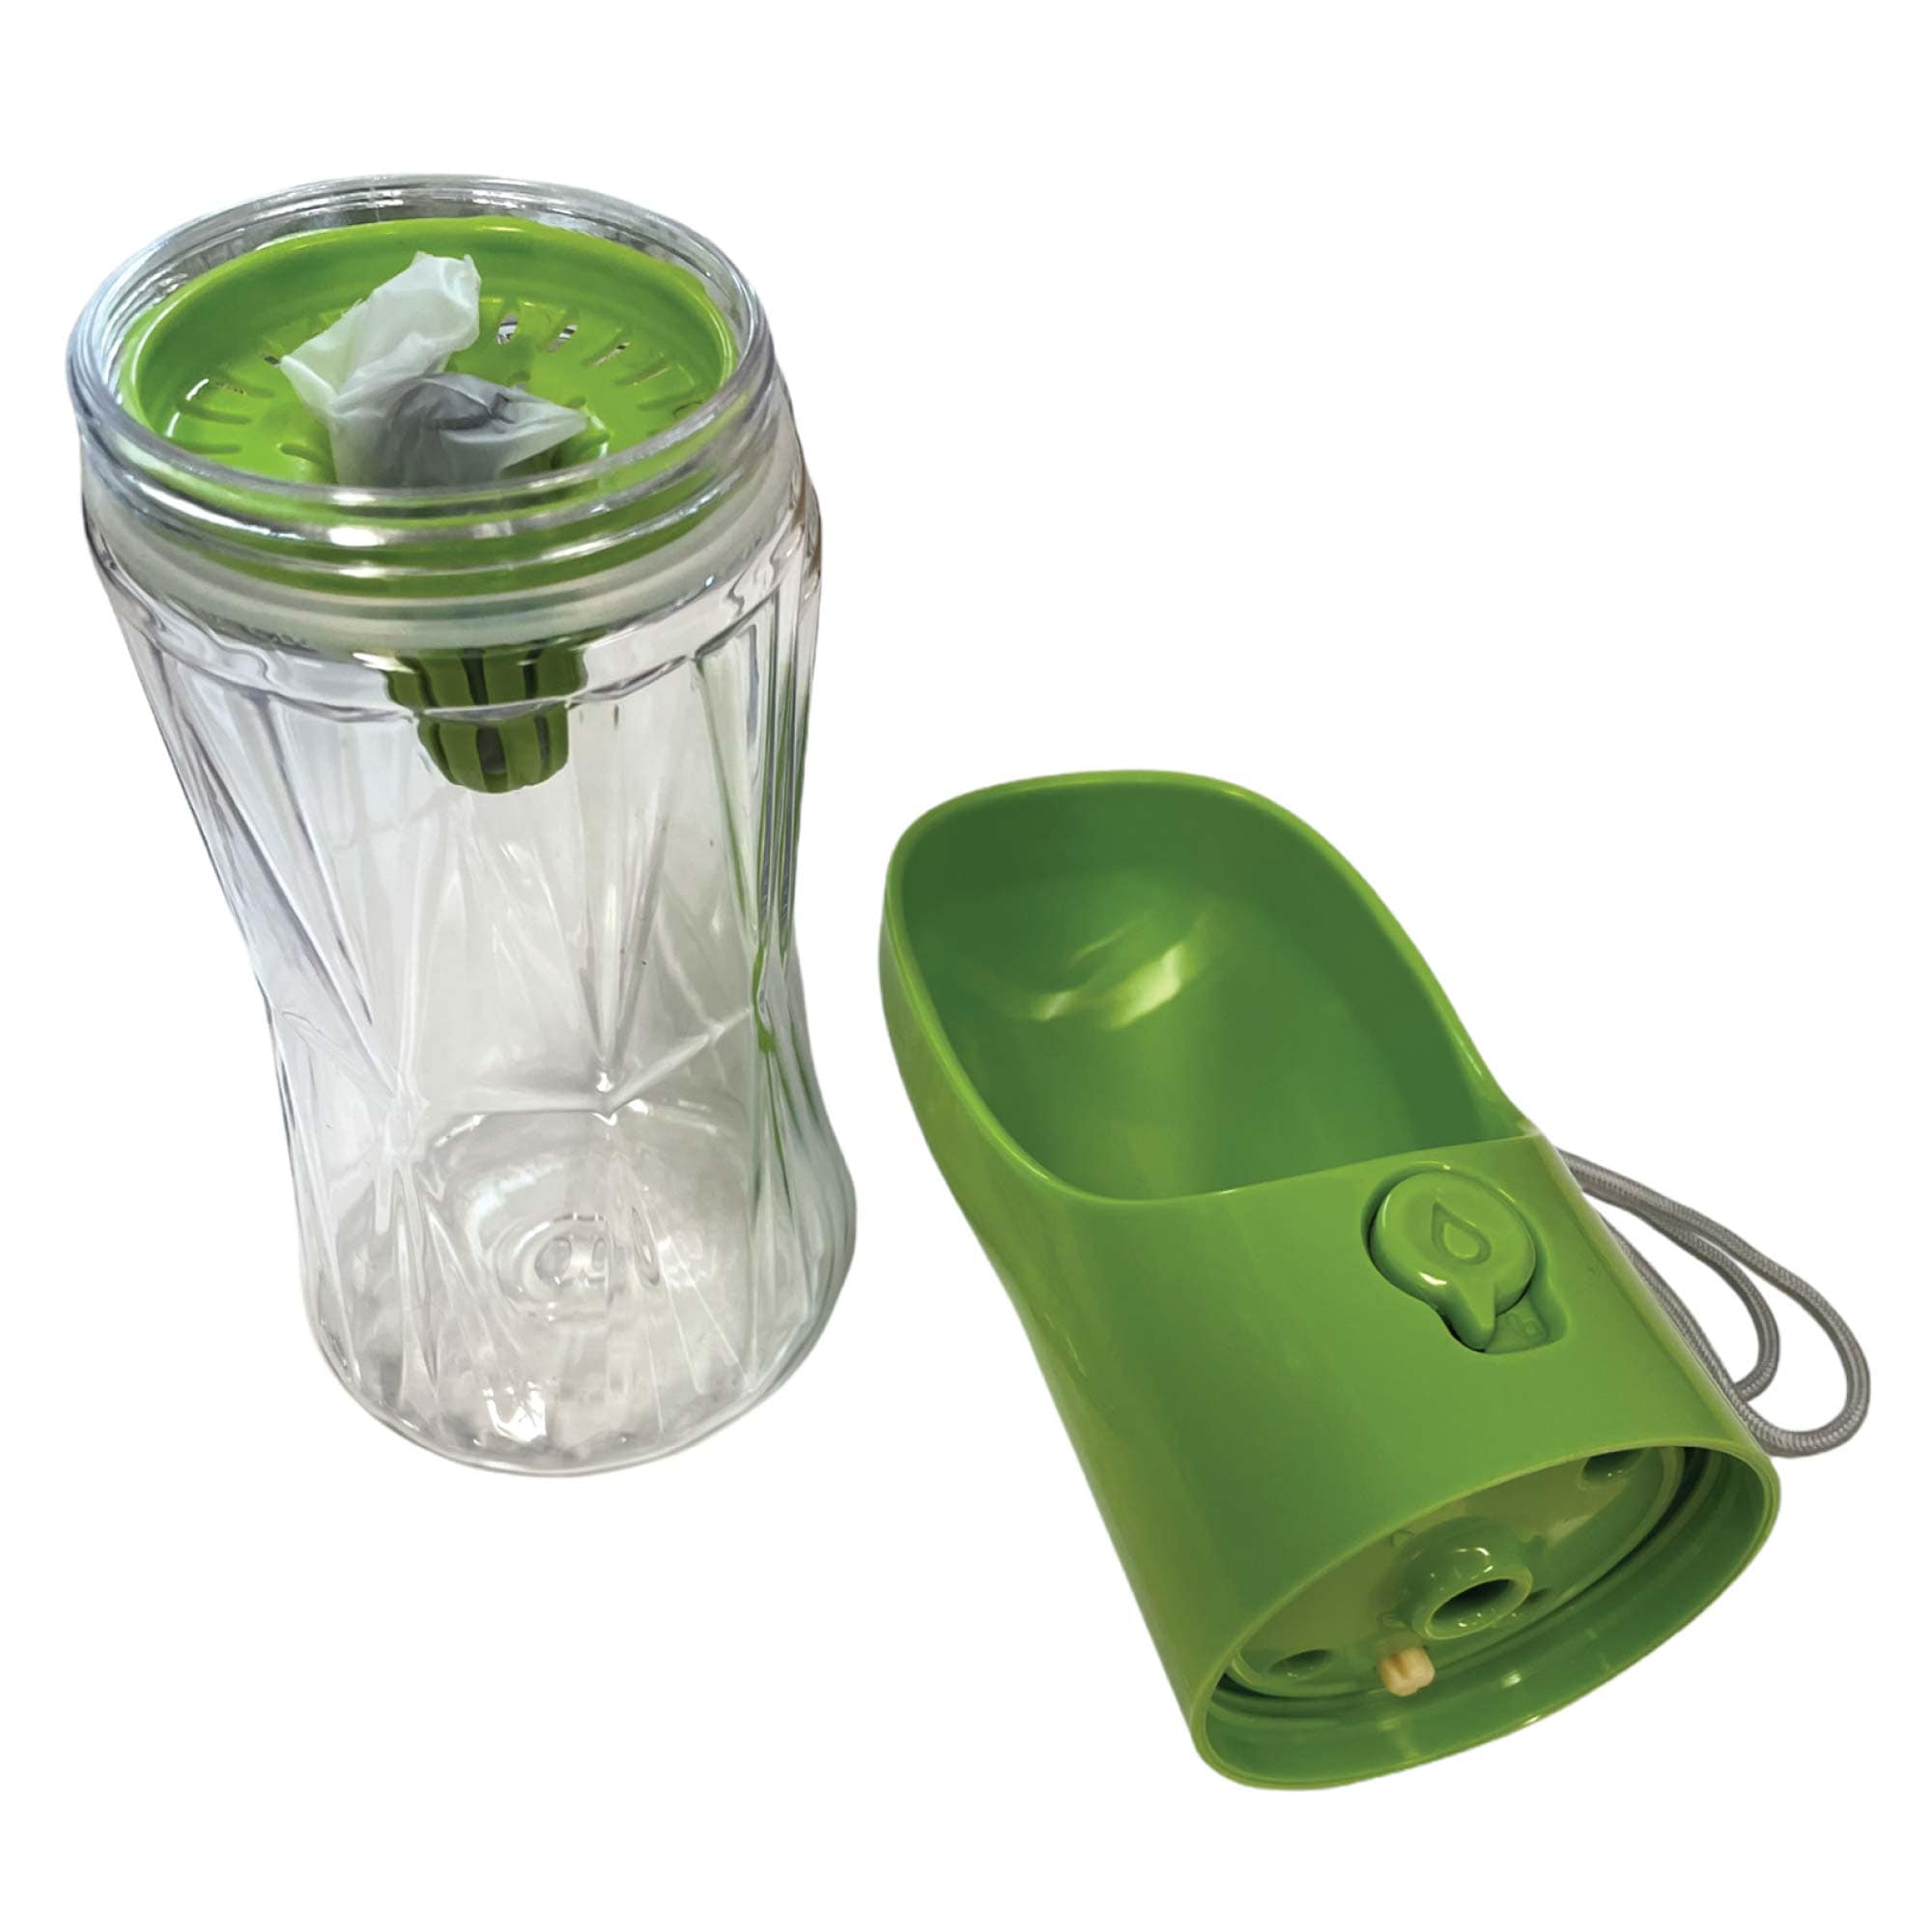 Travel-Friendly 380ml Pet Water Bottle with Filter - Perfect for Dogs & Cats